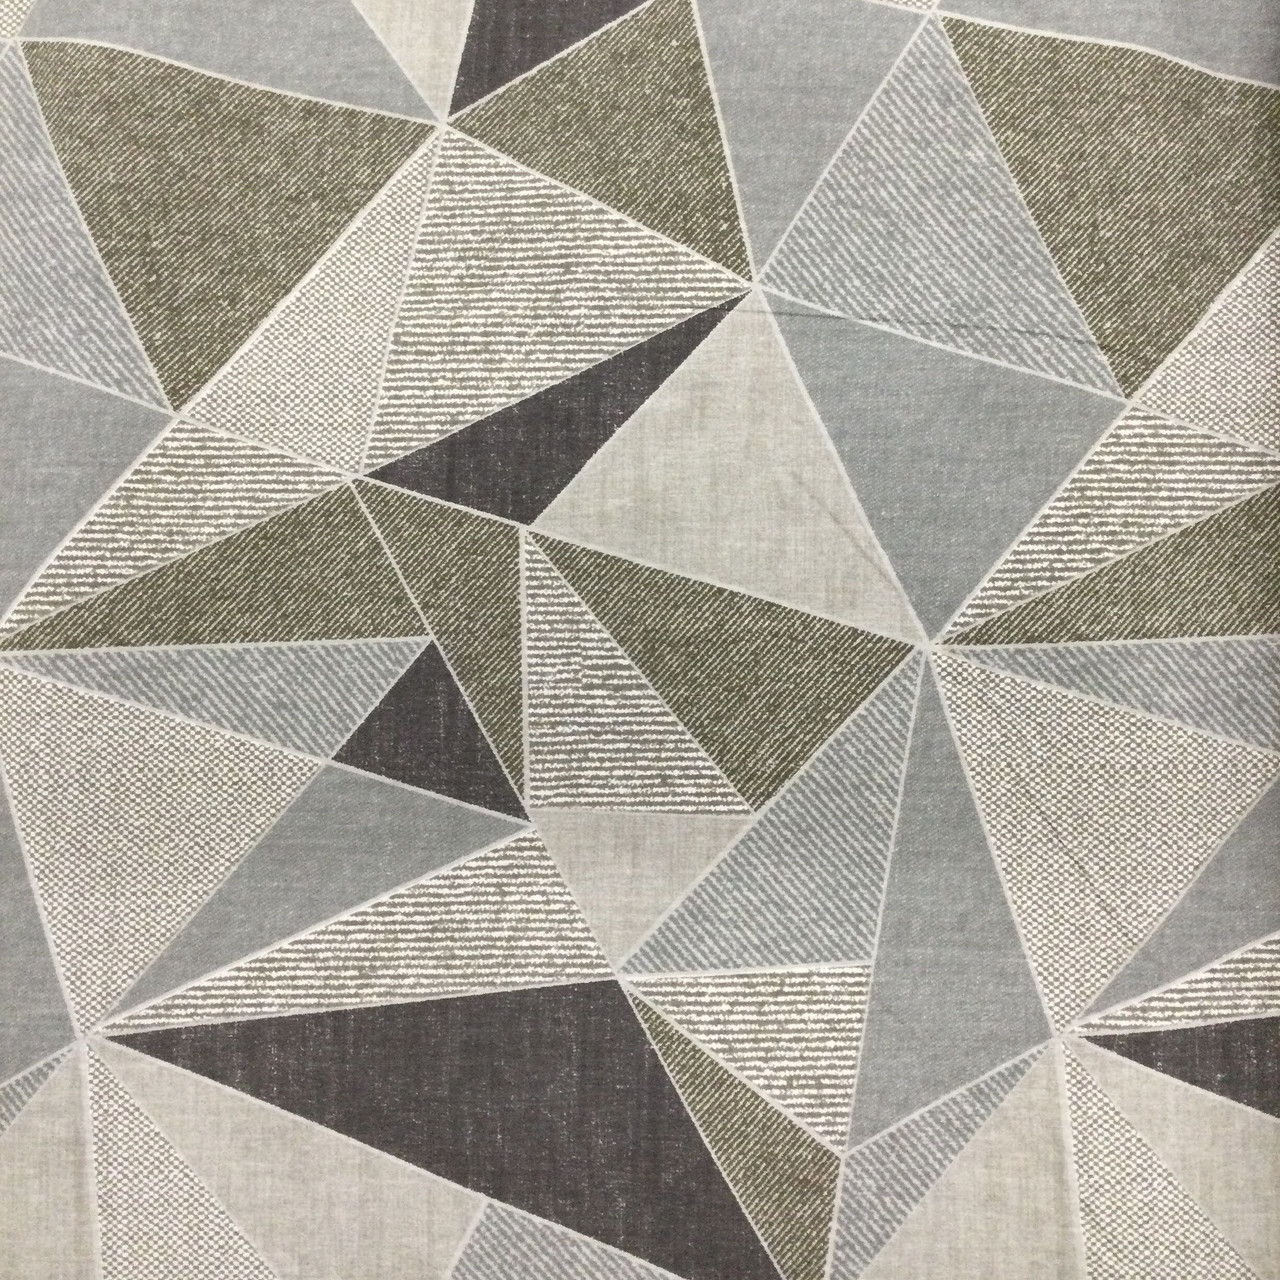 Grey Tone Patchwork Print, Quilting Fabric, 100% Cotton, 45 inch Wide